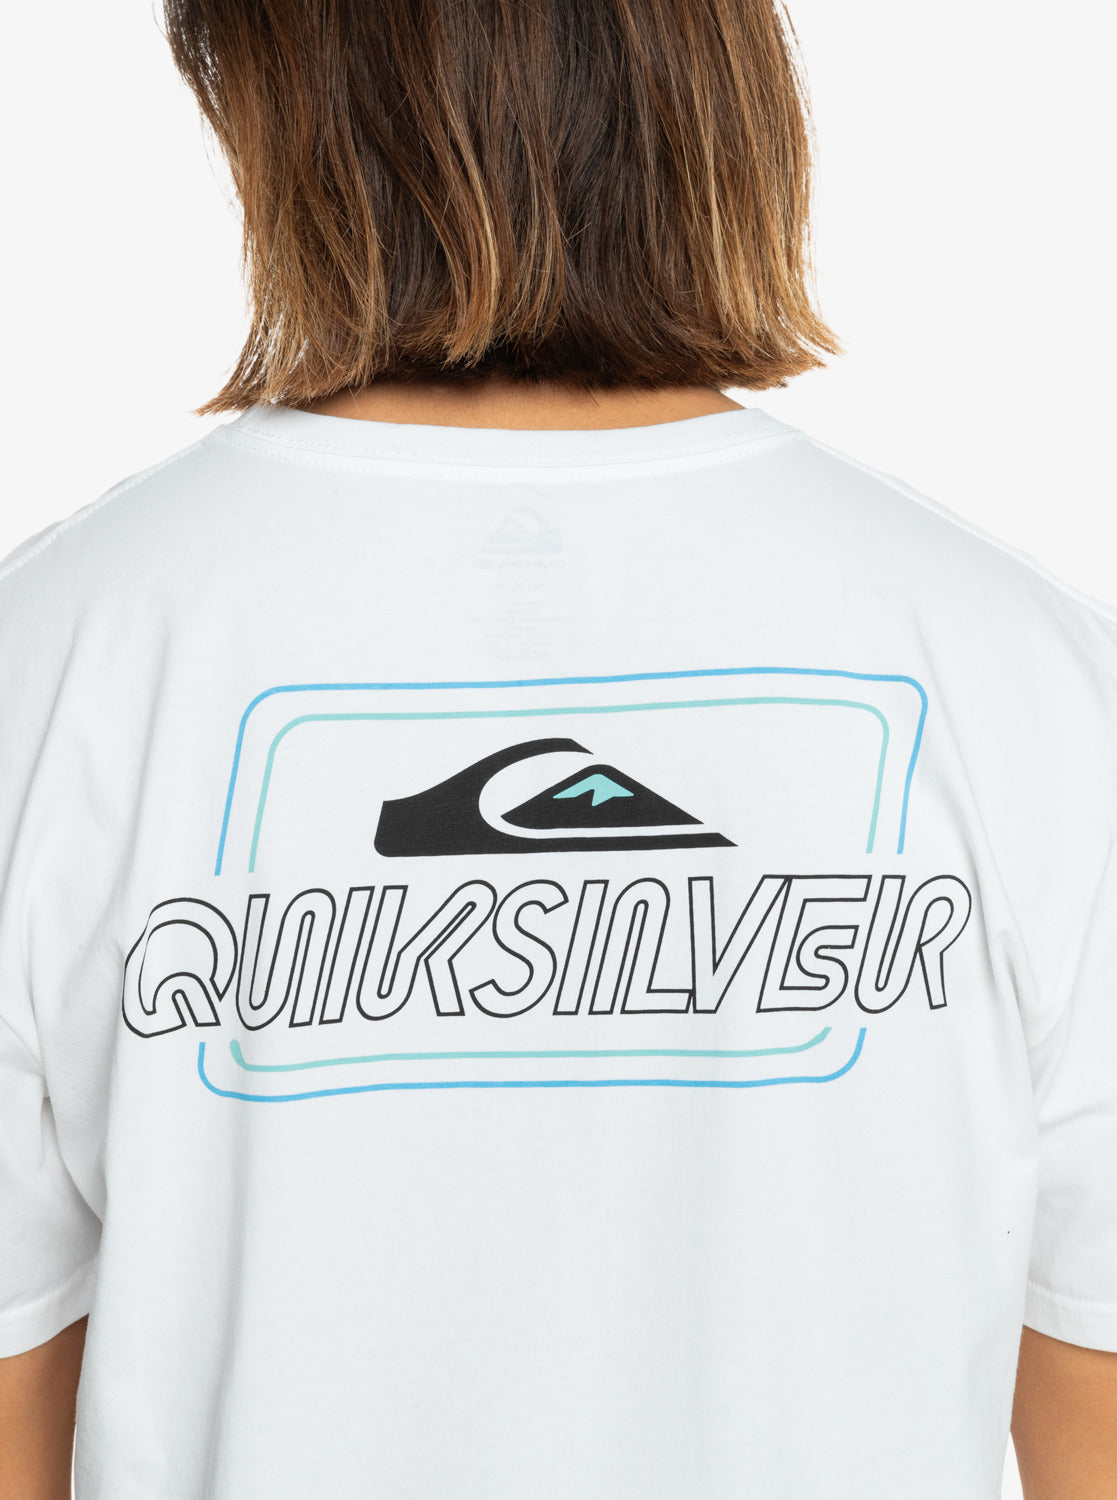 Quicksilver Line By Line - T-Shirt - White